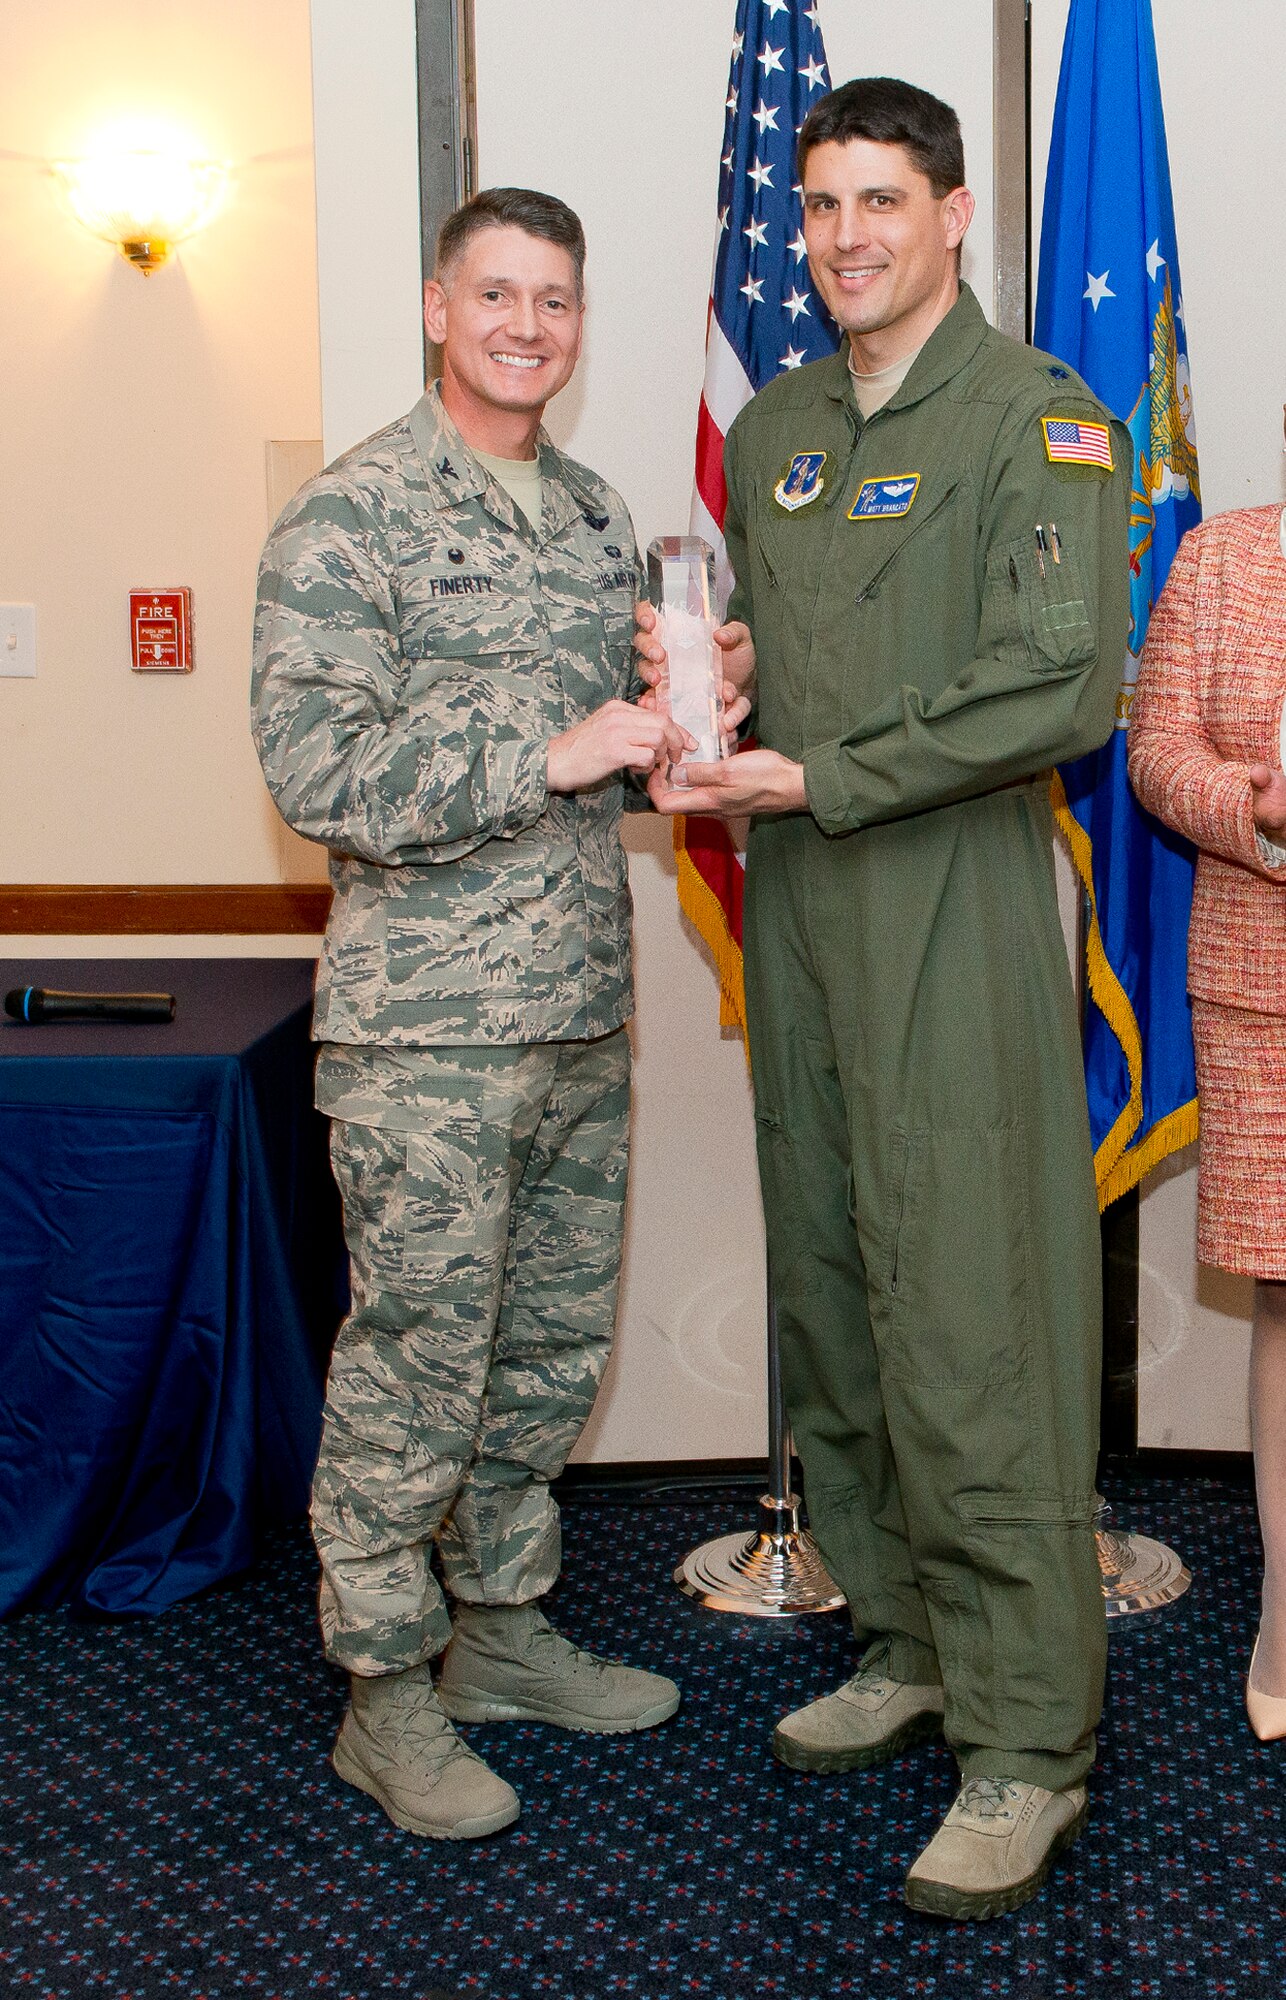 Col. Christopher E. Finerty, the vice commander of the Air National Guard Readiness Center Joint Base Andrews, Md., presents the Senior Field Grade Officer of the Year award to Lt. Col. Mathew G. Brancato during the 2015 ANGRC annual awards ceremony, April 18, 2016. The ceremony recognizes significant contributions in leadership, job performance in their primary duties, self-improvement, and base and community involvement. (Air National Guard photo by Master Sgt. Marvin R. Preston/Released)